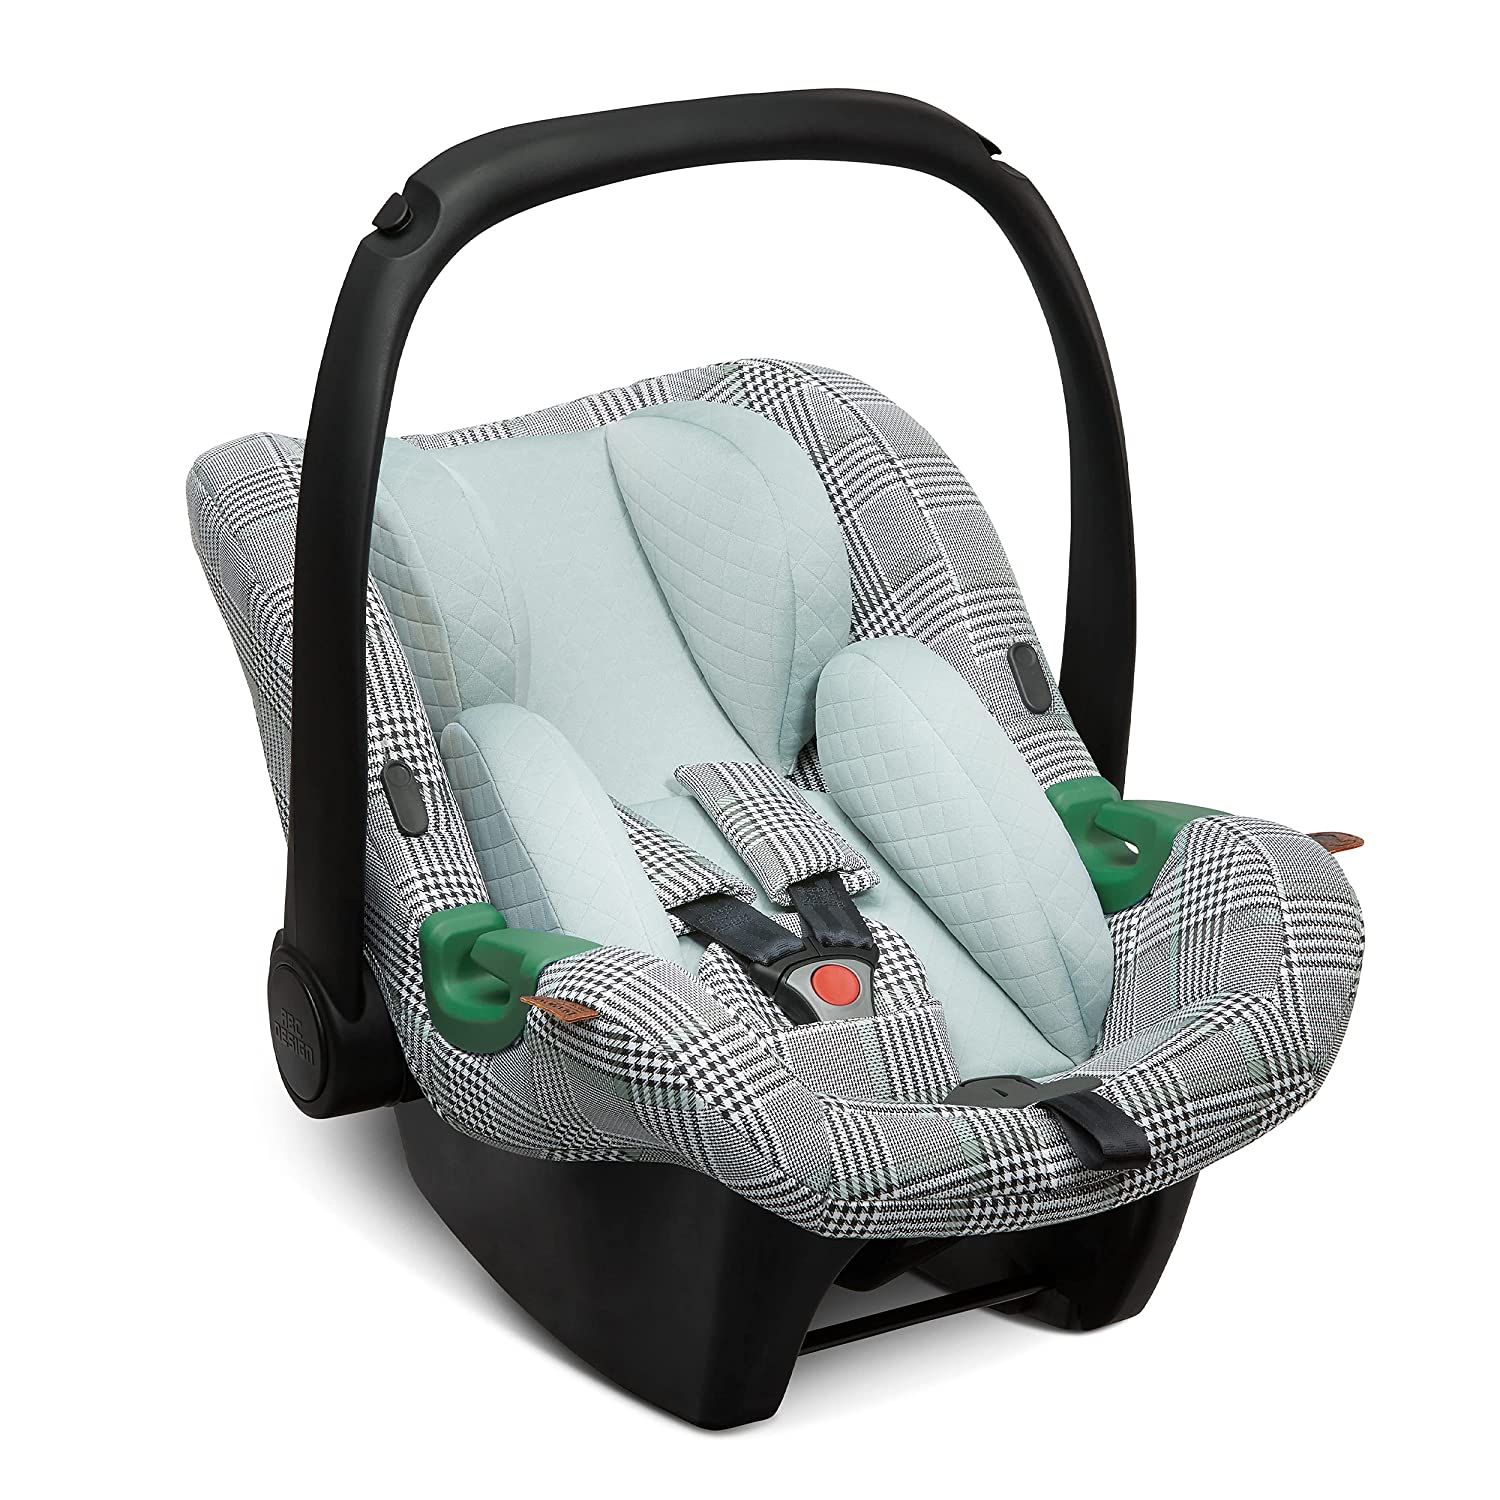 ABC Design Baby Car Seat Tulip Fashion Edition – Baby car seat for group 0+ i-Size up to 13 KG - Adjustable headrest - Side impact protection & 3-point belt system - Color: emerald